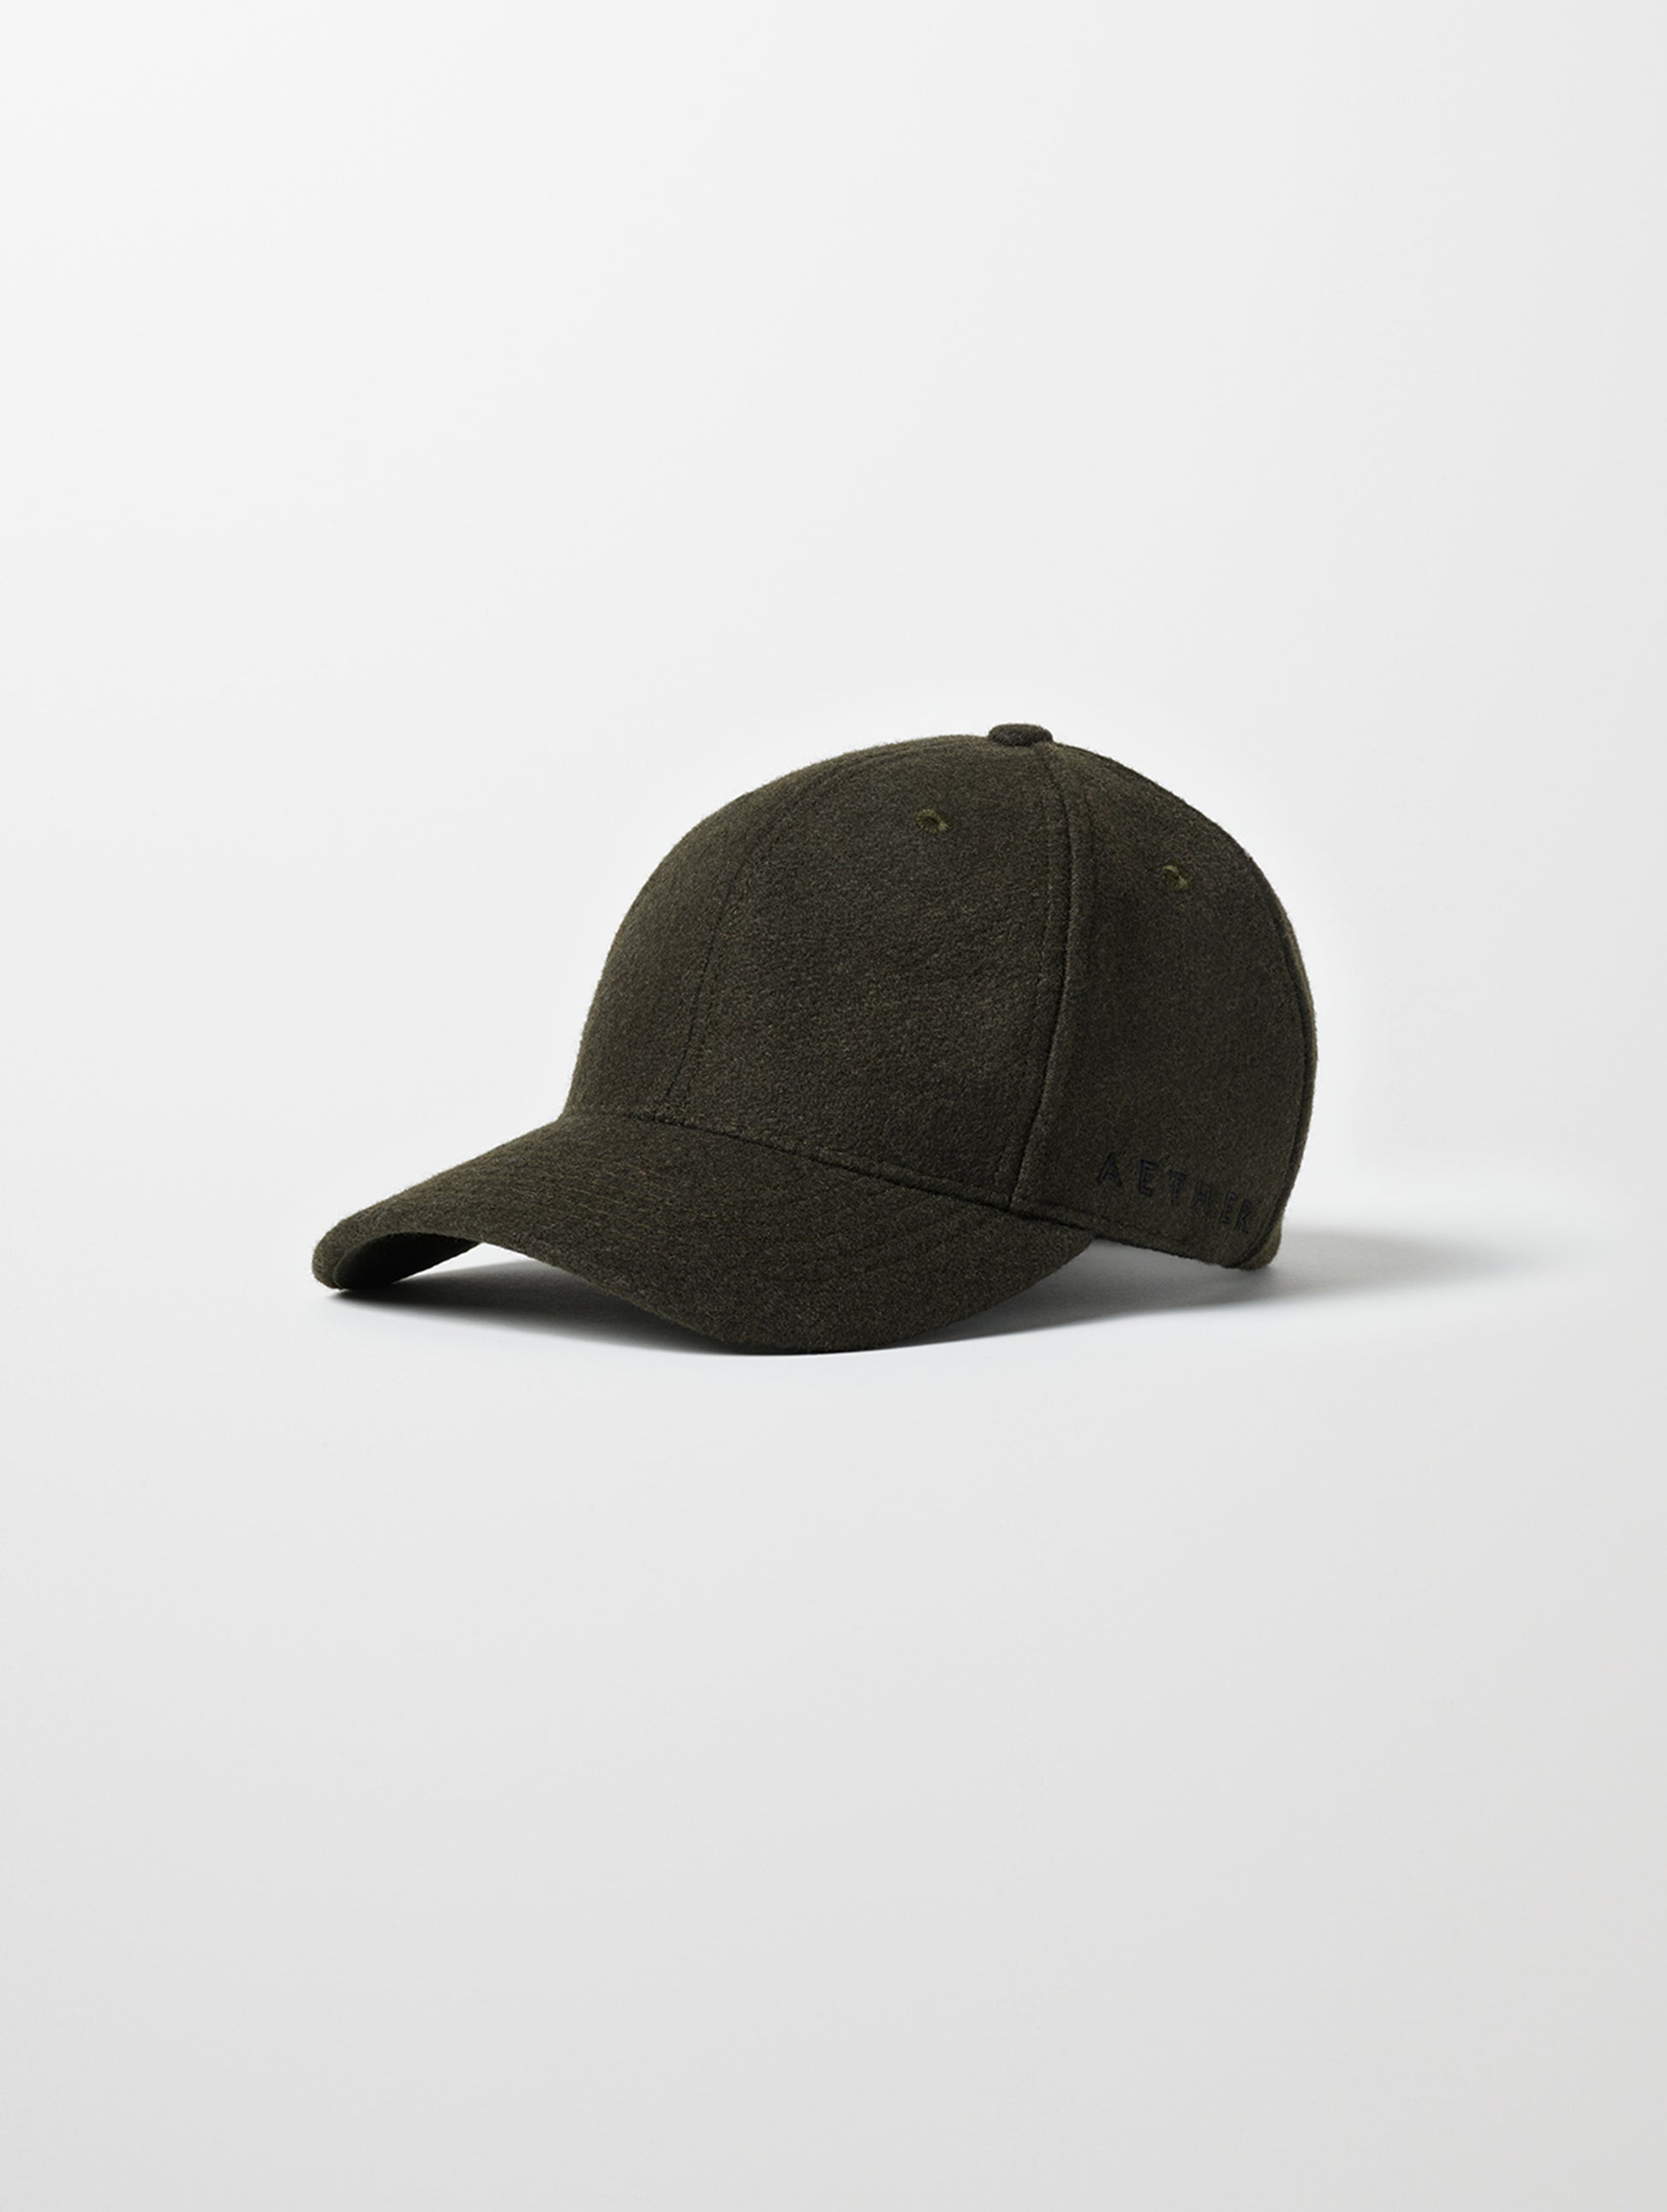 Dark green wool hat from AETHER Apparel